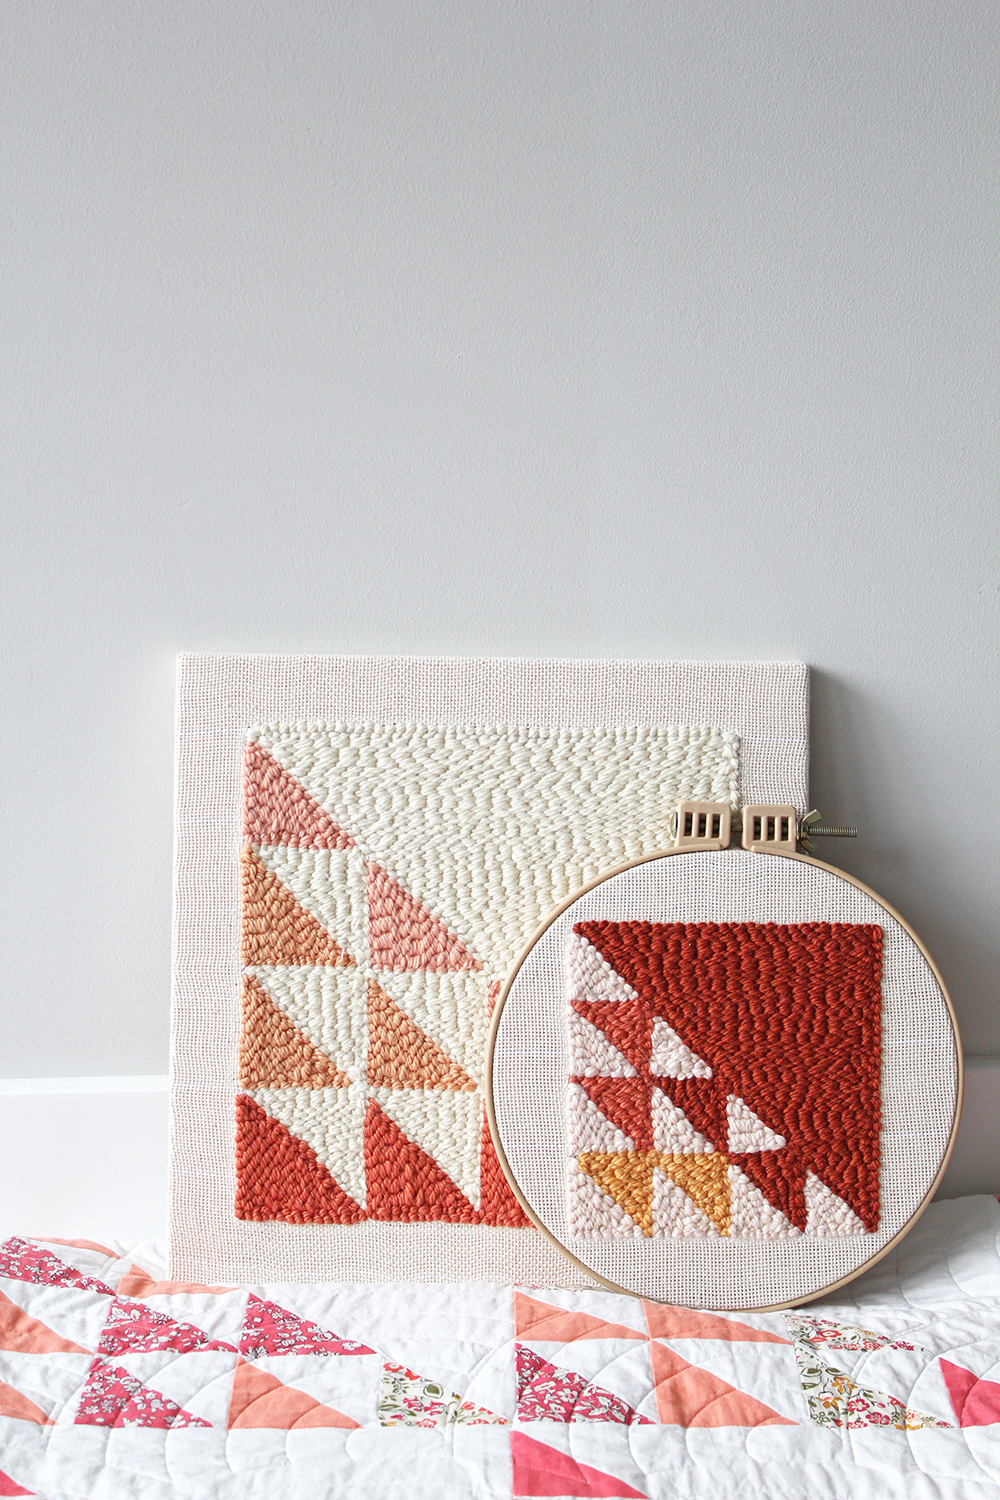 Turn a Suzy Quilts pattern into a punch needle masterpiece with this step by step tutorial! Learn a new fiber arts skill from scratch, and make a quilt block punch needle canvas to match your latest quilt. suzyquilts.com #quilting #sewingdiy